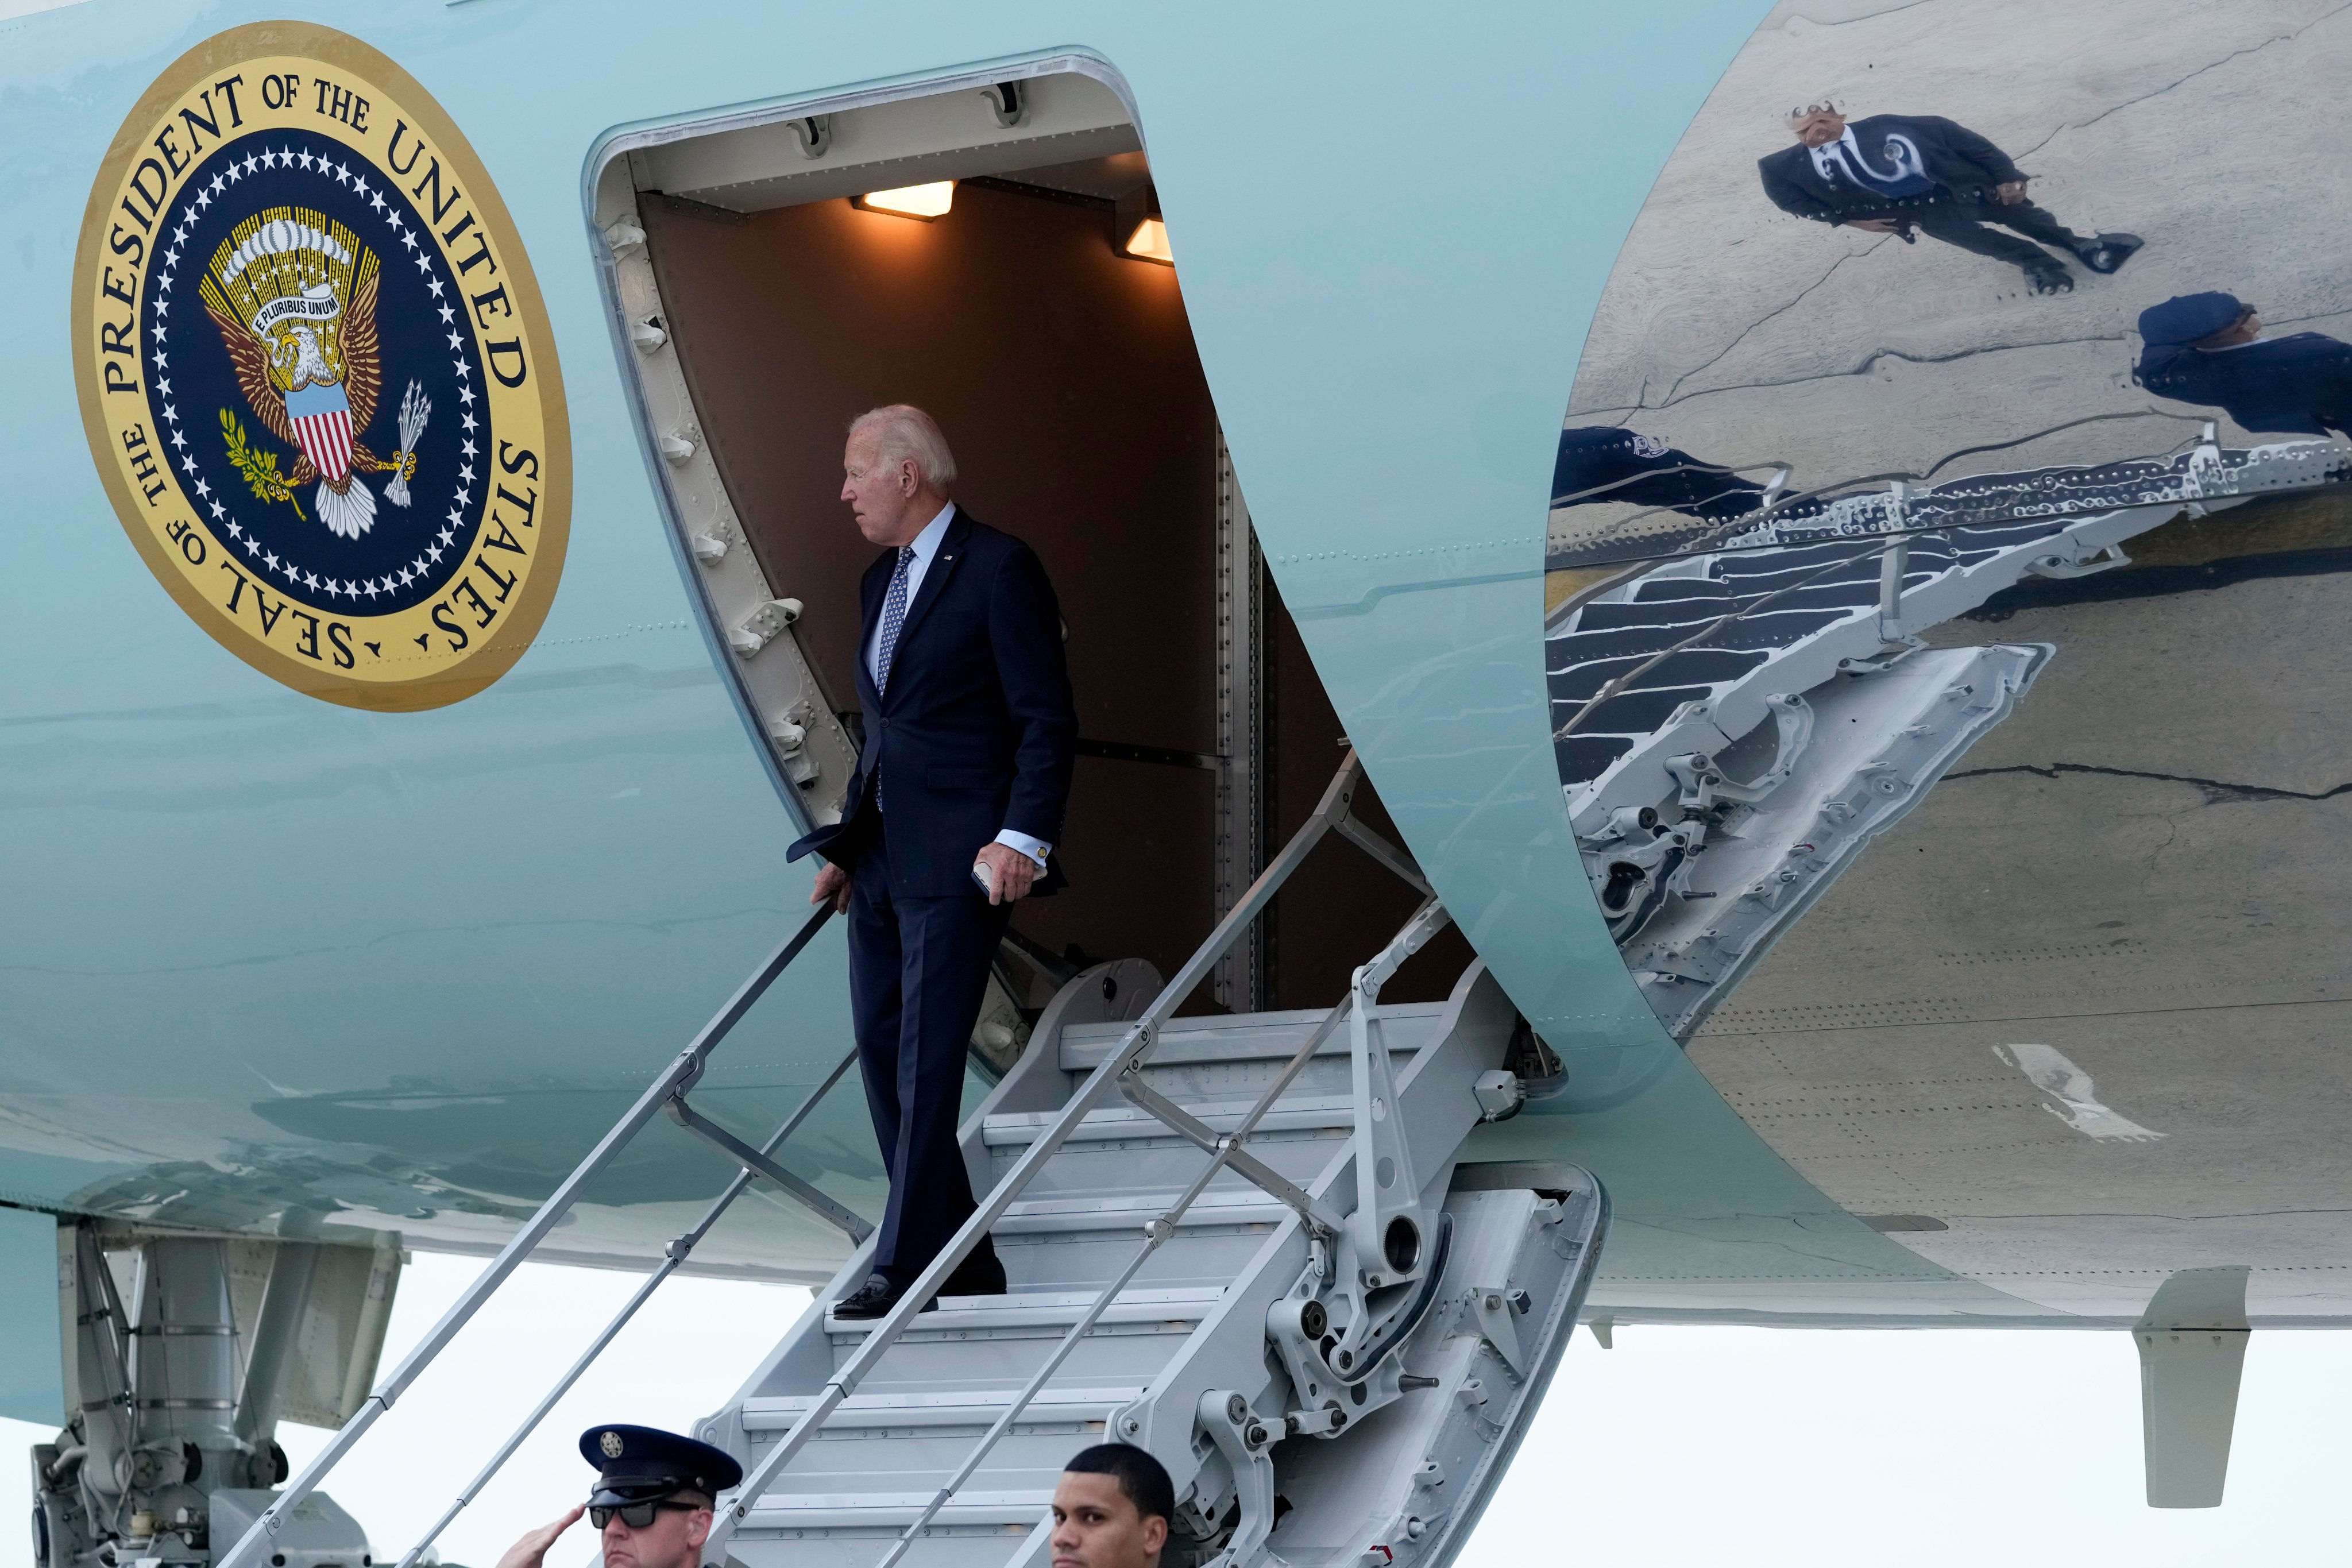 US President Joe Biden disembarks from Air Force One in New York on Sunday ahead of the United Nations General Assembly. Photo: AP